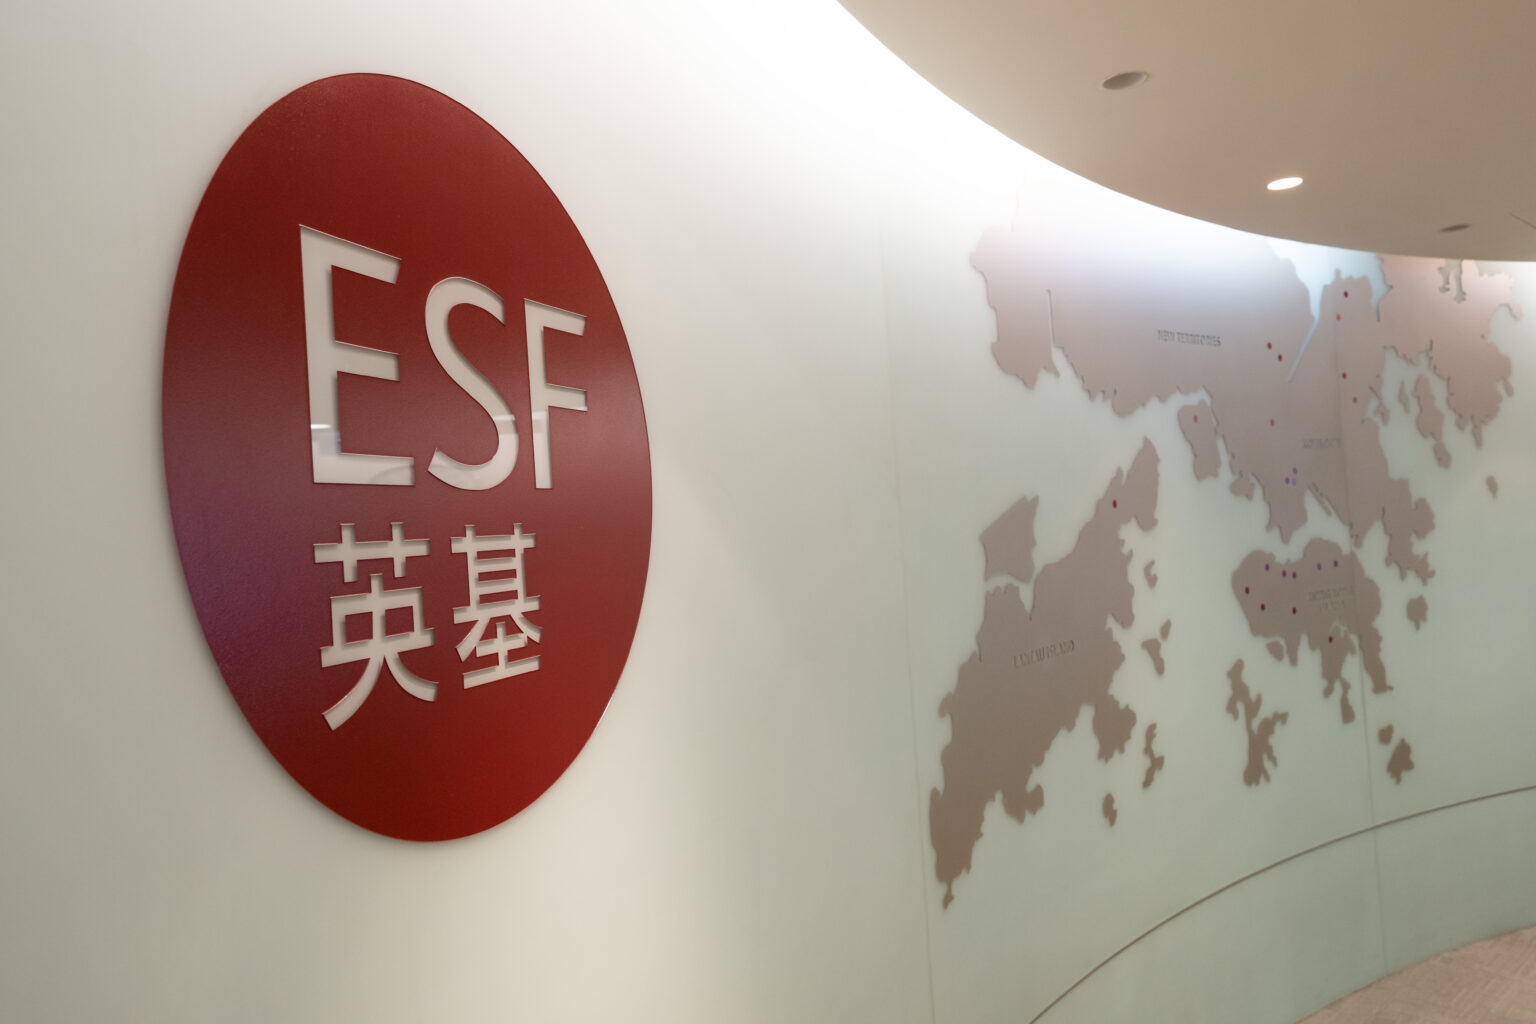 Hong Kong students can apply to any ESF school from August 1